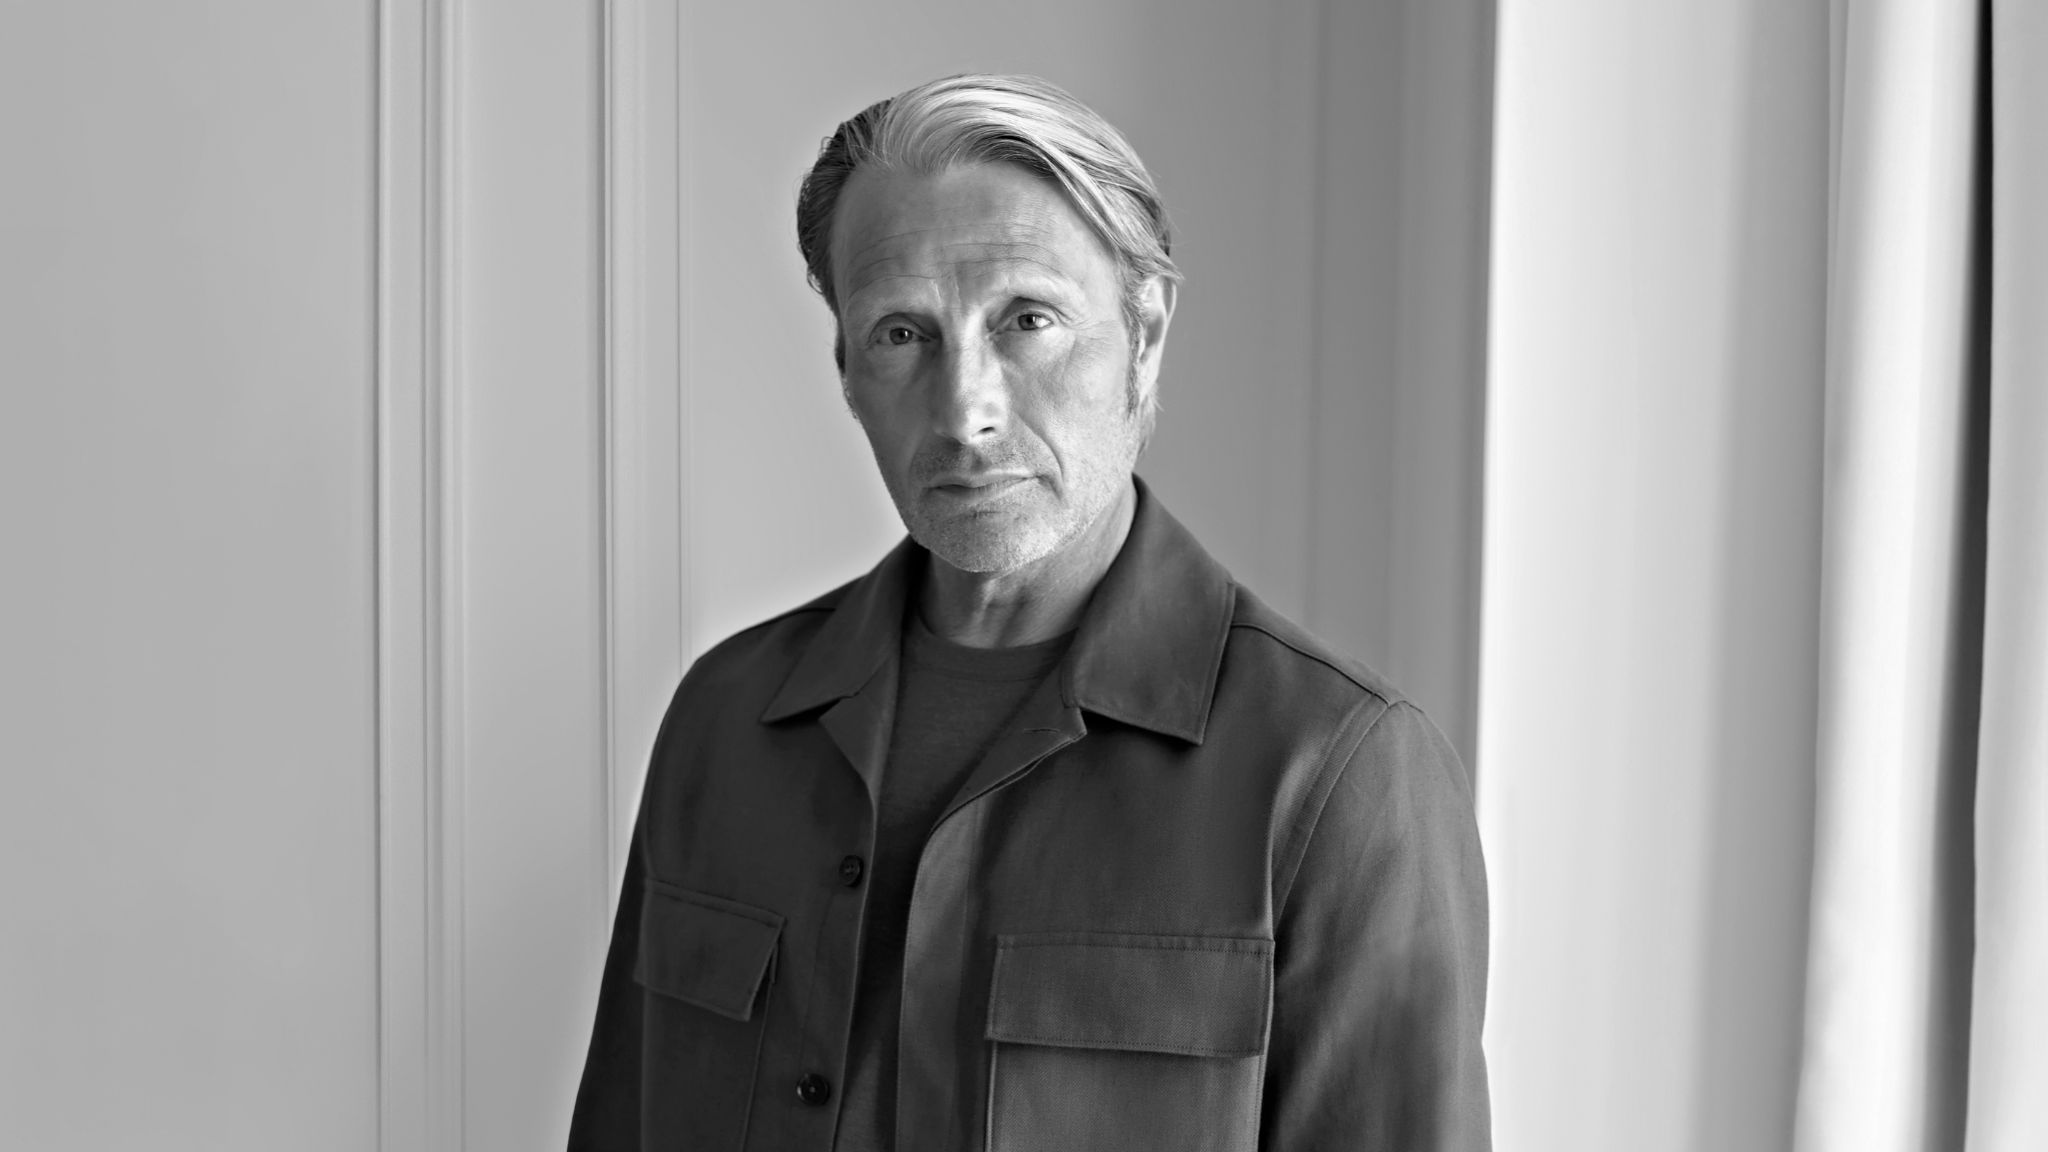 ZEGNA Announces MADS MIKKELSEN As Its New Global Testimonial